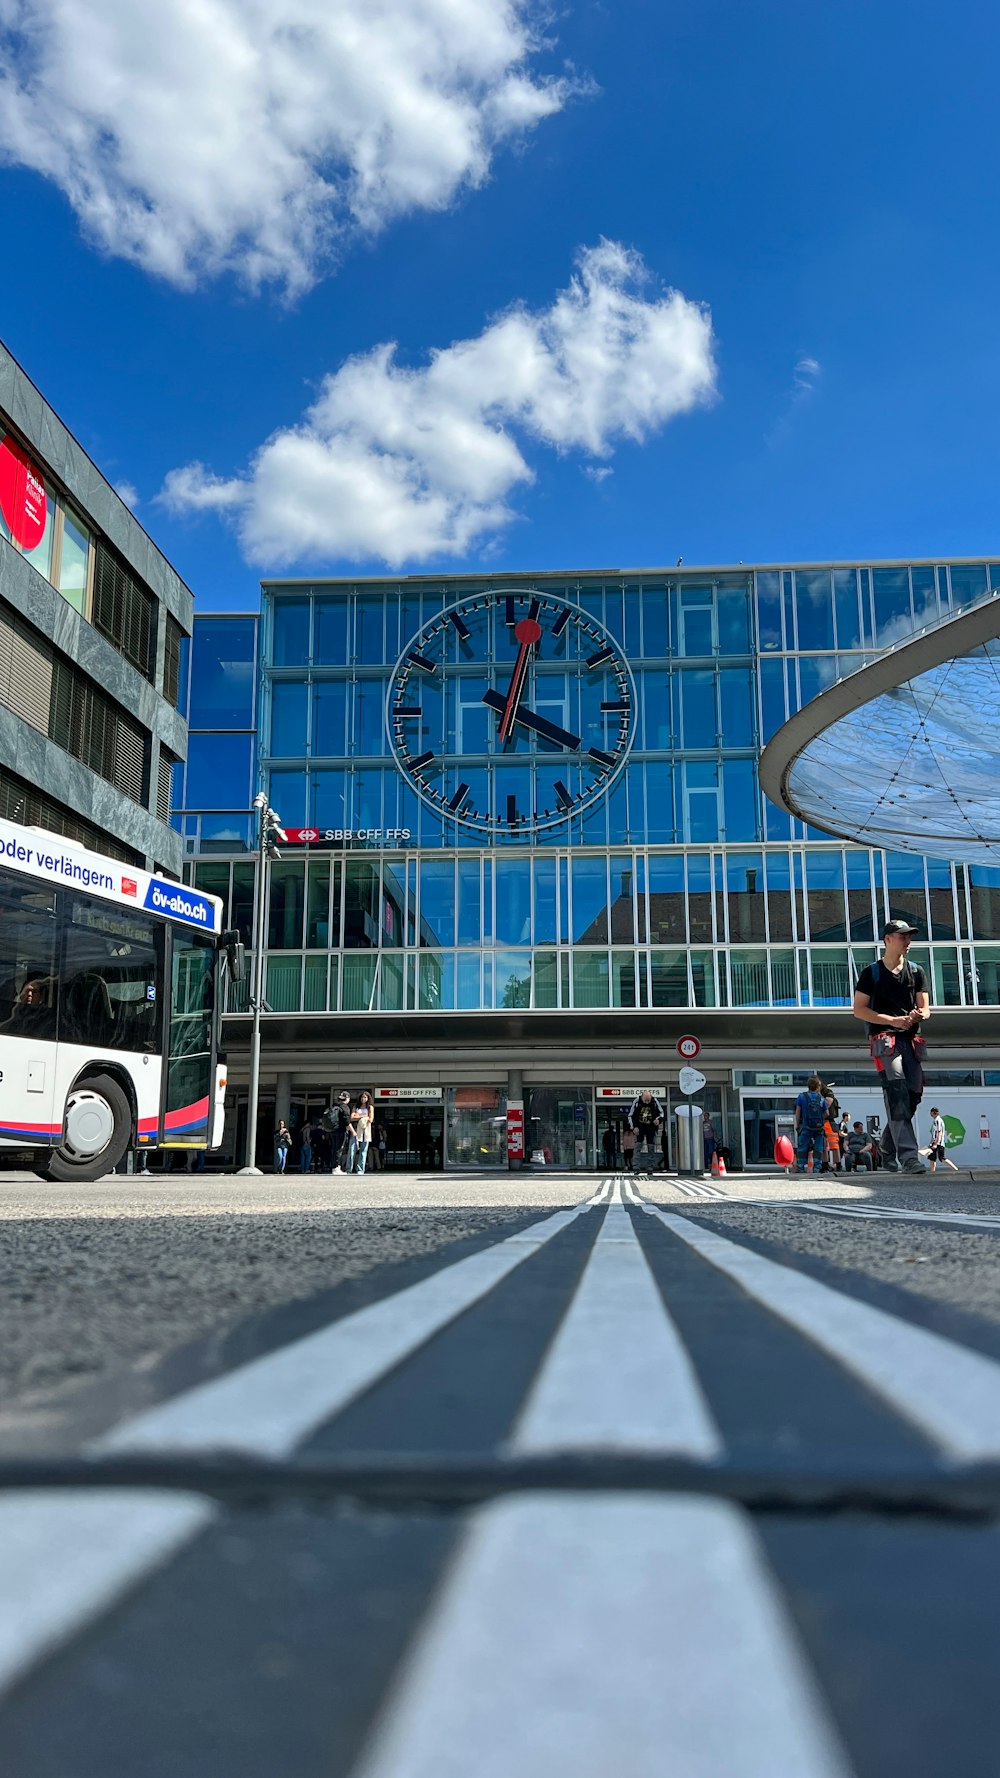 a bus parked in front of a building with a clock on it